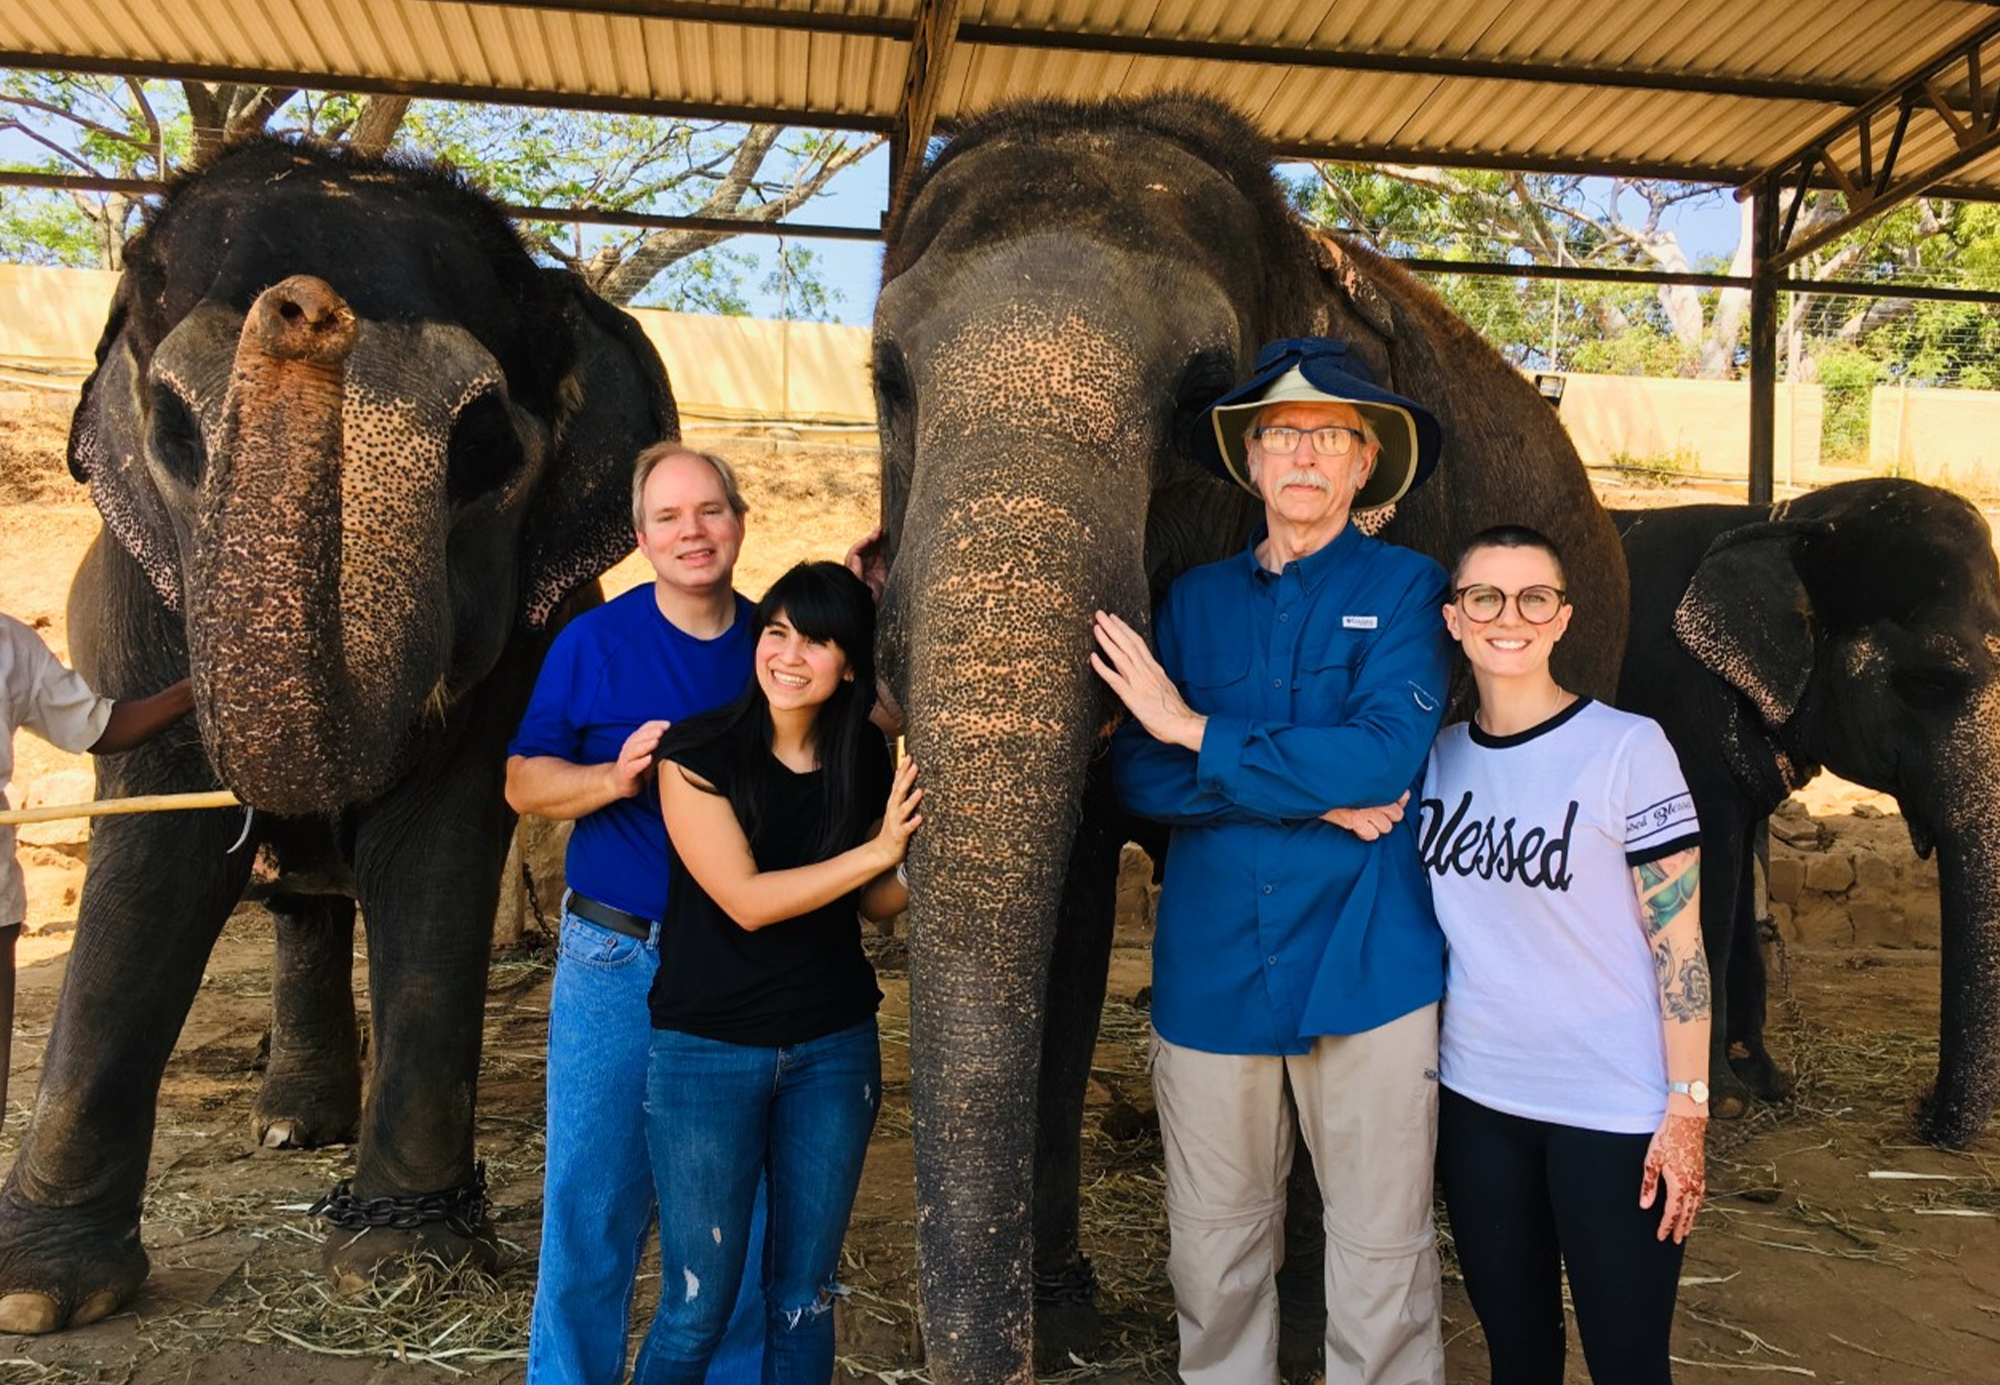 Residents and faculty with elephants at one of the Global Health Program locations.